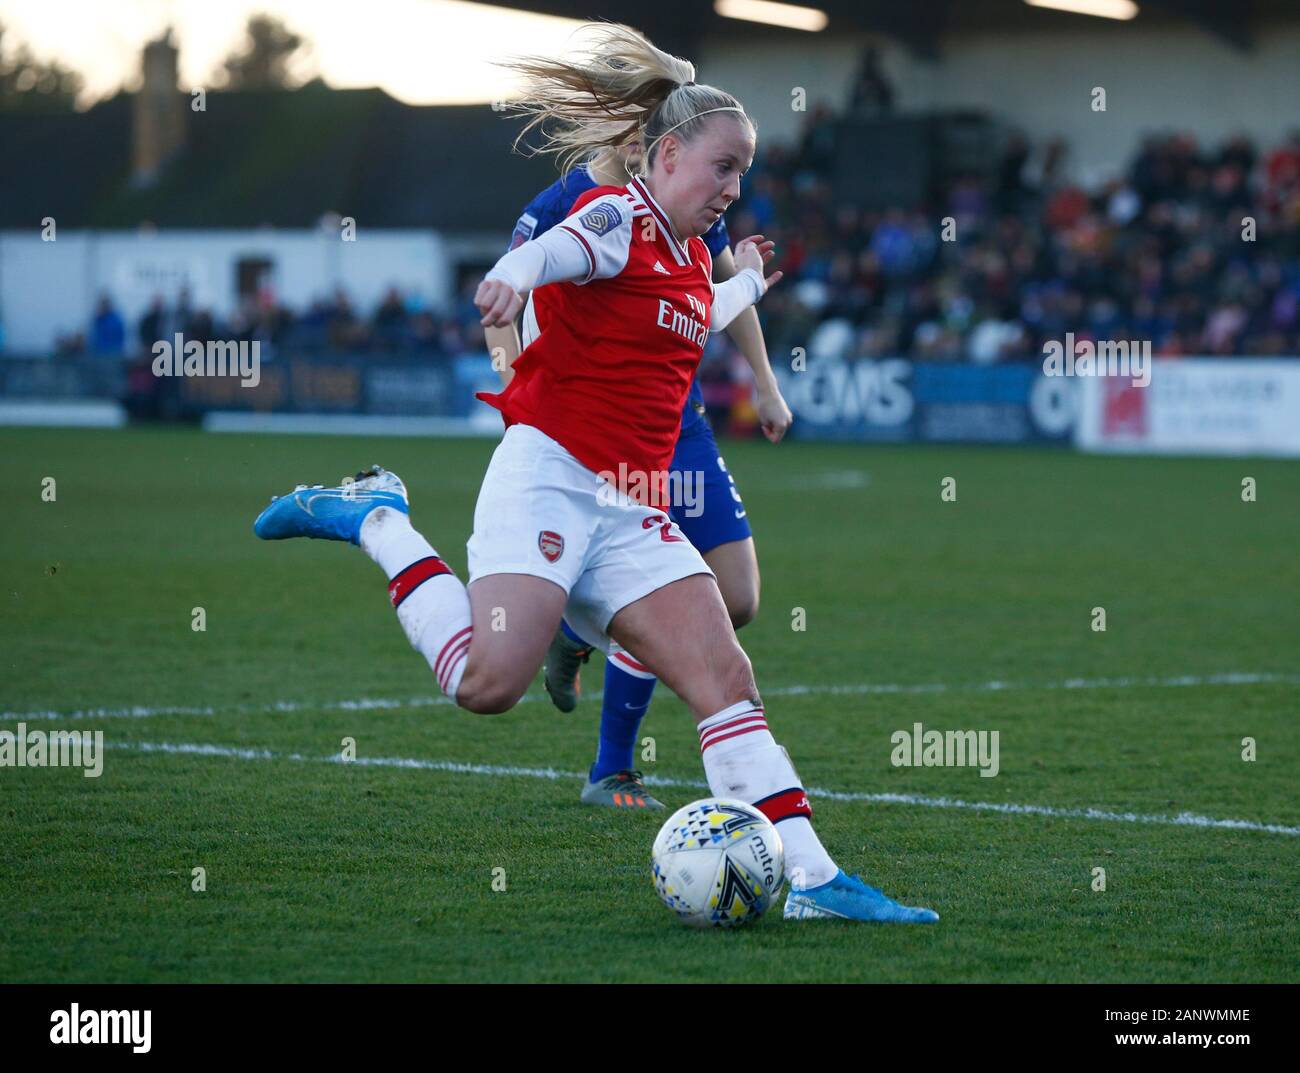 Beth Mead of Arsenal during Barclays Women's Super League match between Arsenal Women and Chelsea Women at Meadow Park Stadium on January 19, 2020 in Borehamwood, England (Photo by AFS/Espa-Images) Stock Photo